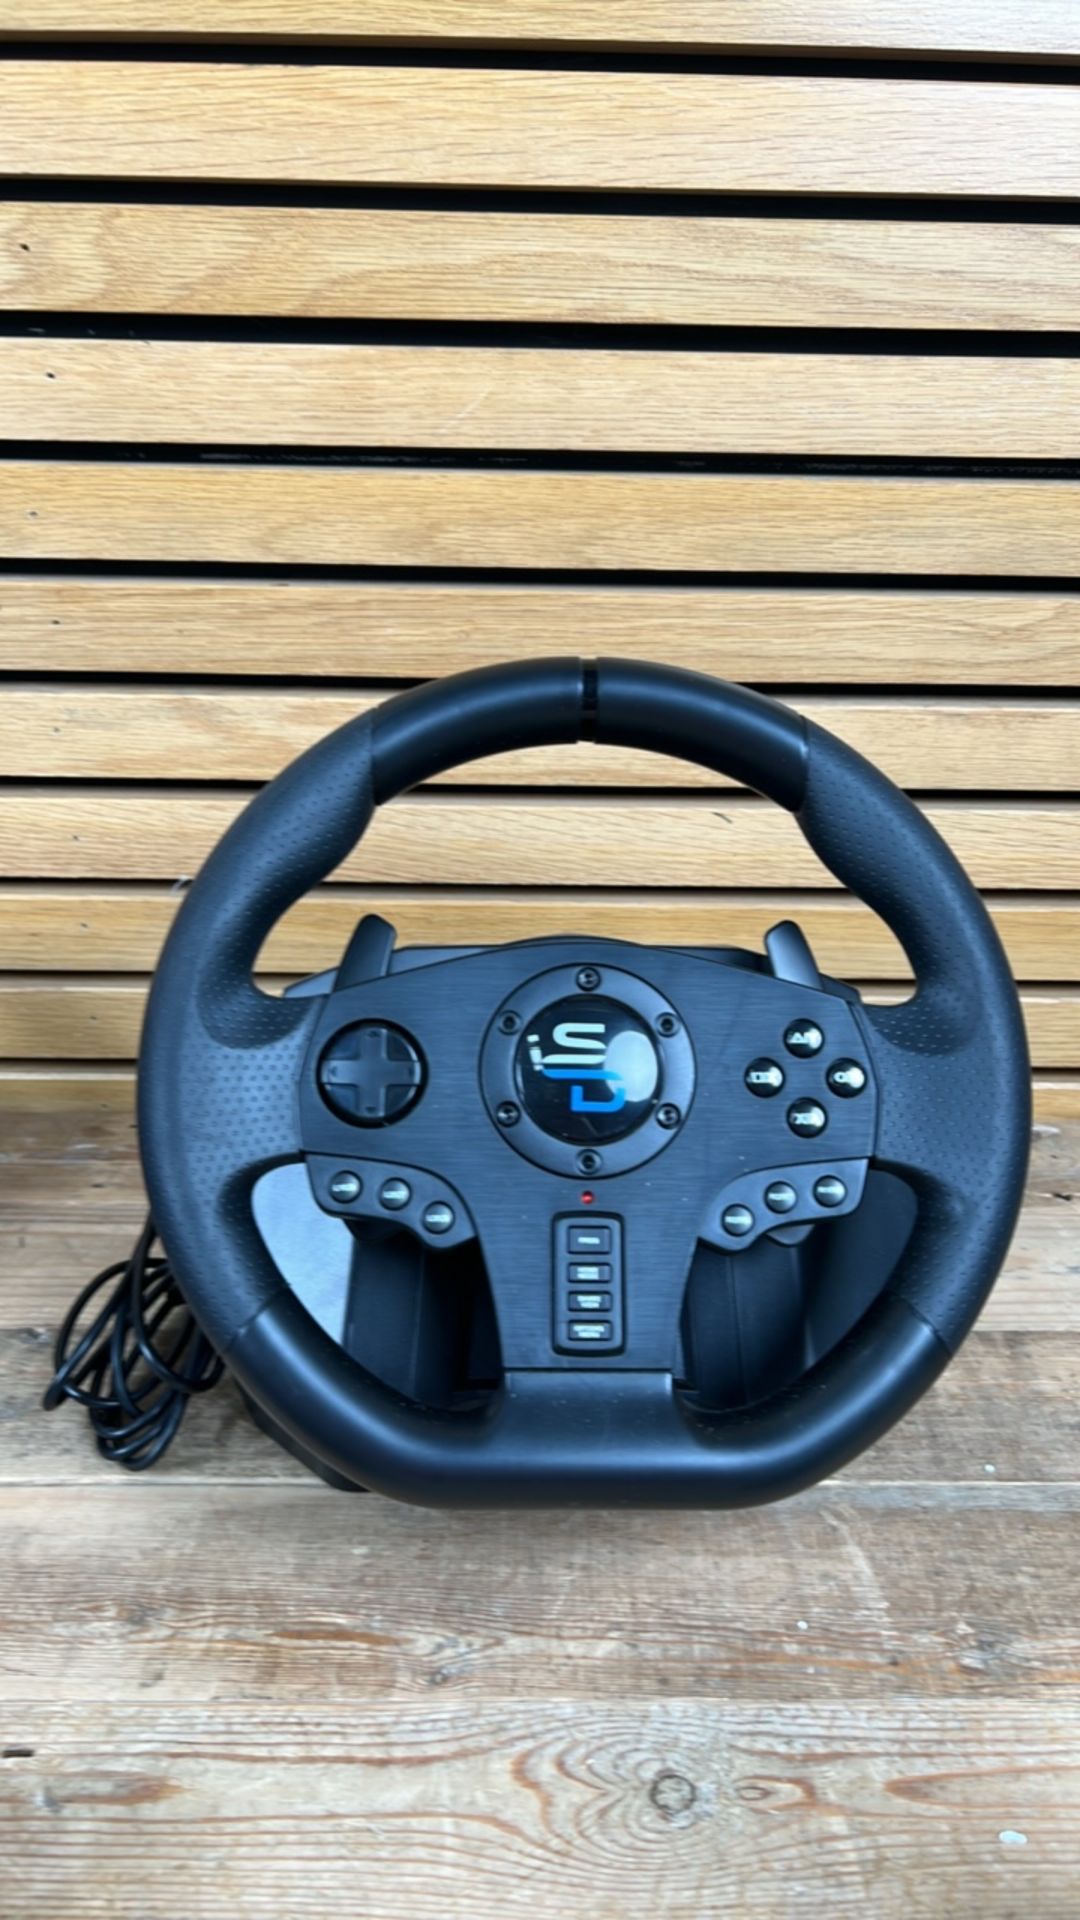 Subsonic GS 850X Universal Gaming Steering Wheel With Vibration, Pedals & Gears - Image 2 of 9